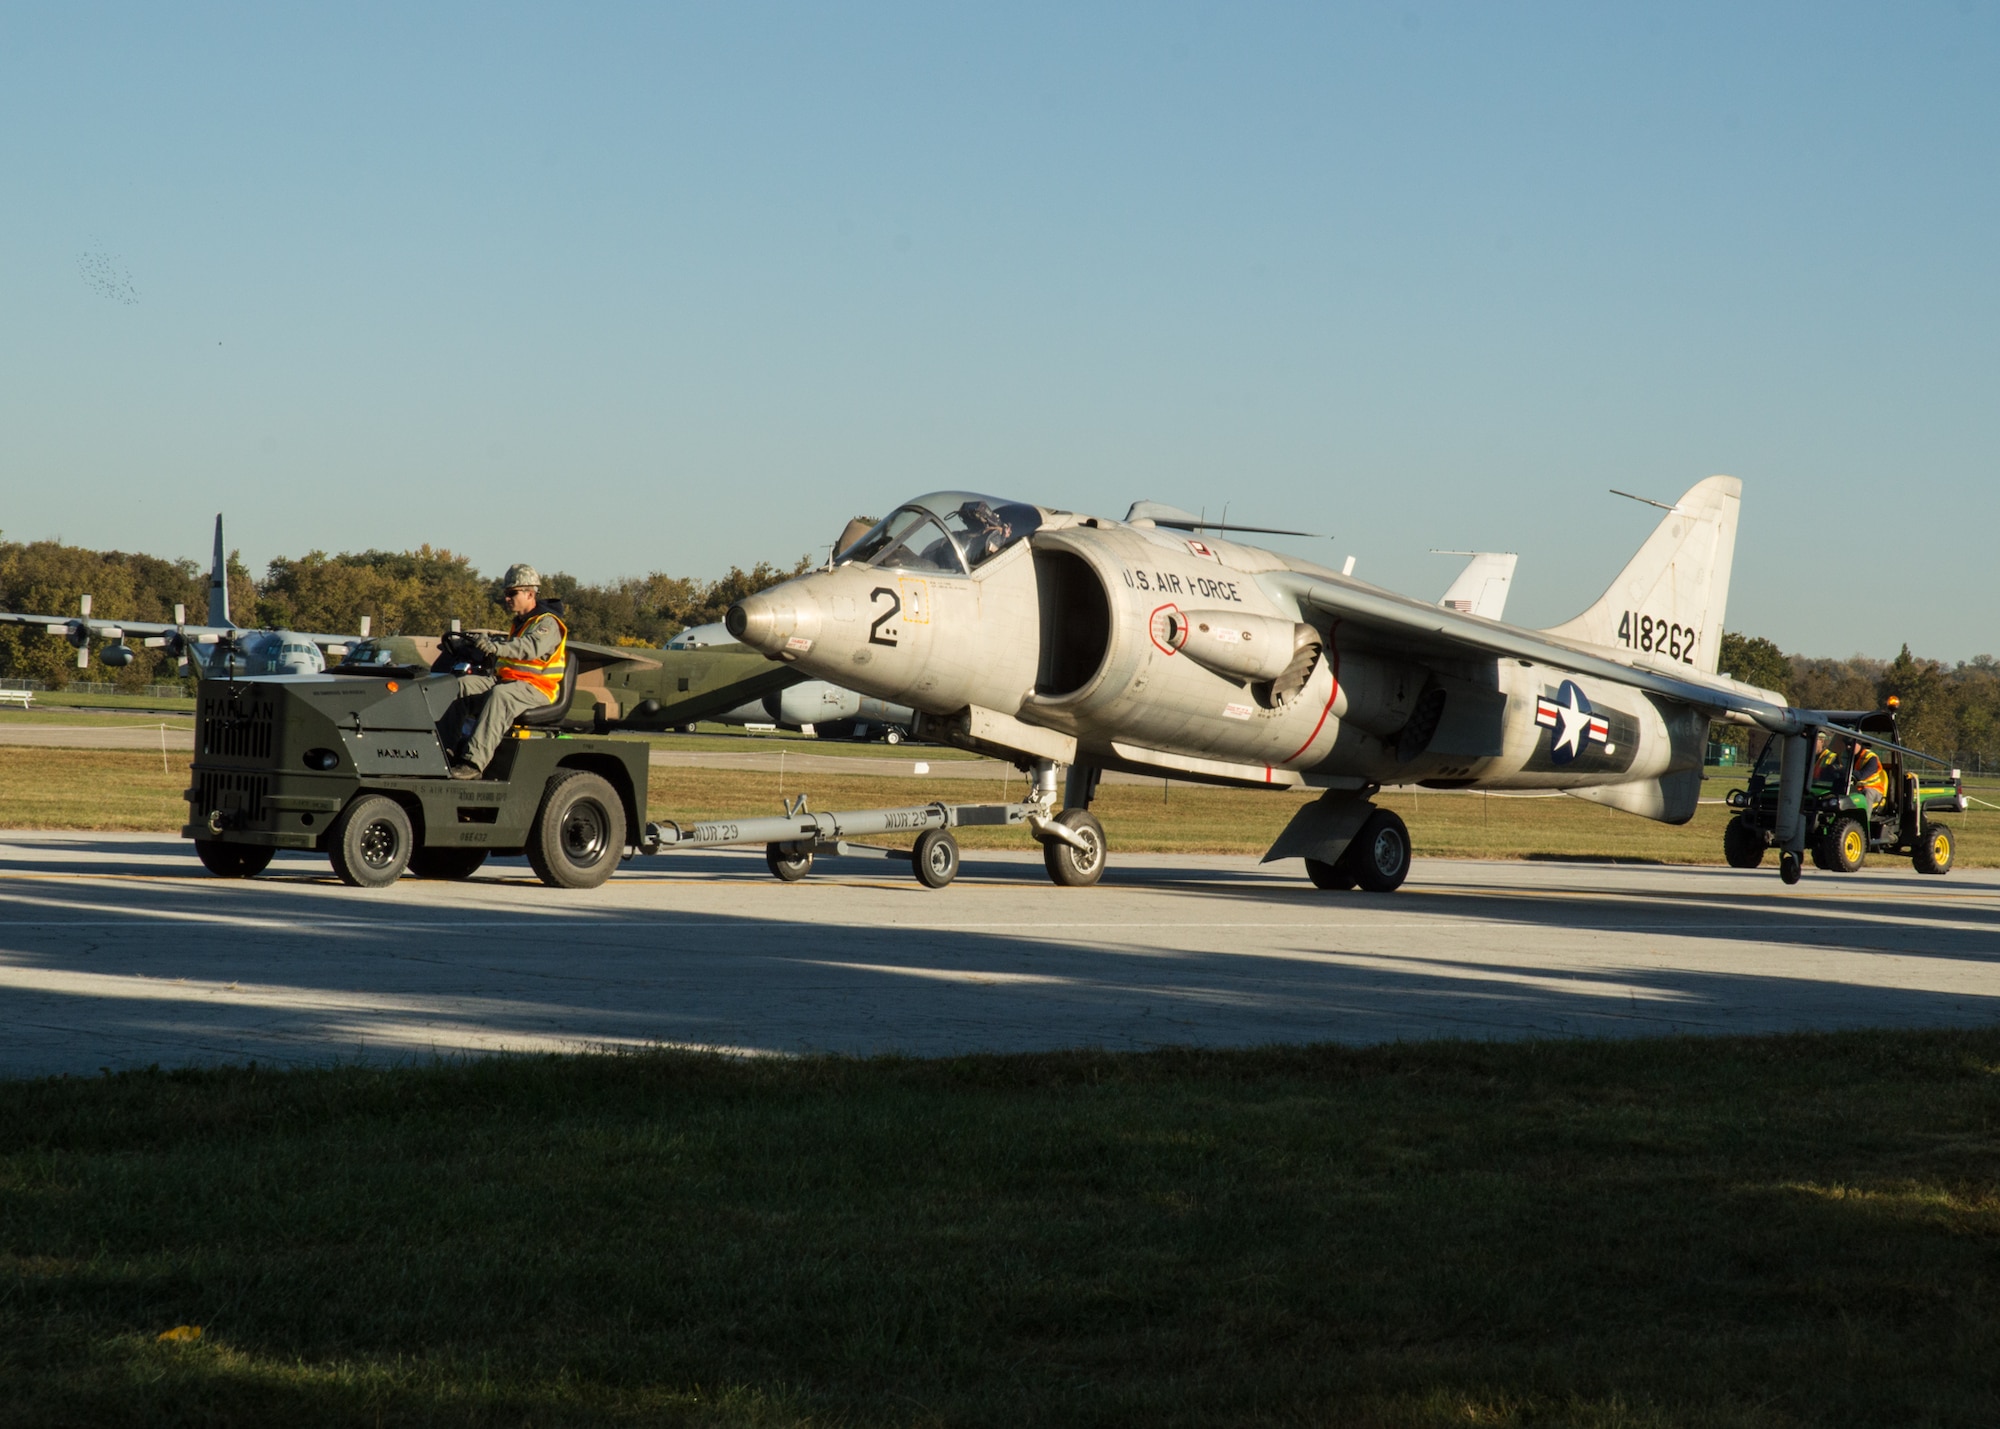 Restoration staff move the Hawker Siddeley XV-6A into the new fourth building at the National Museum of the U.S. Air Force on Oct. 8, 2015. (U.S. Air Force photo by Ken LaRock)